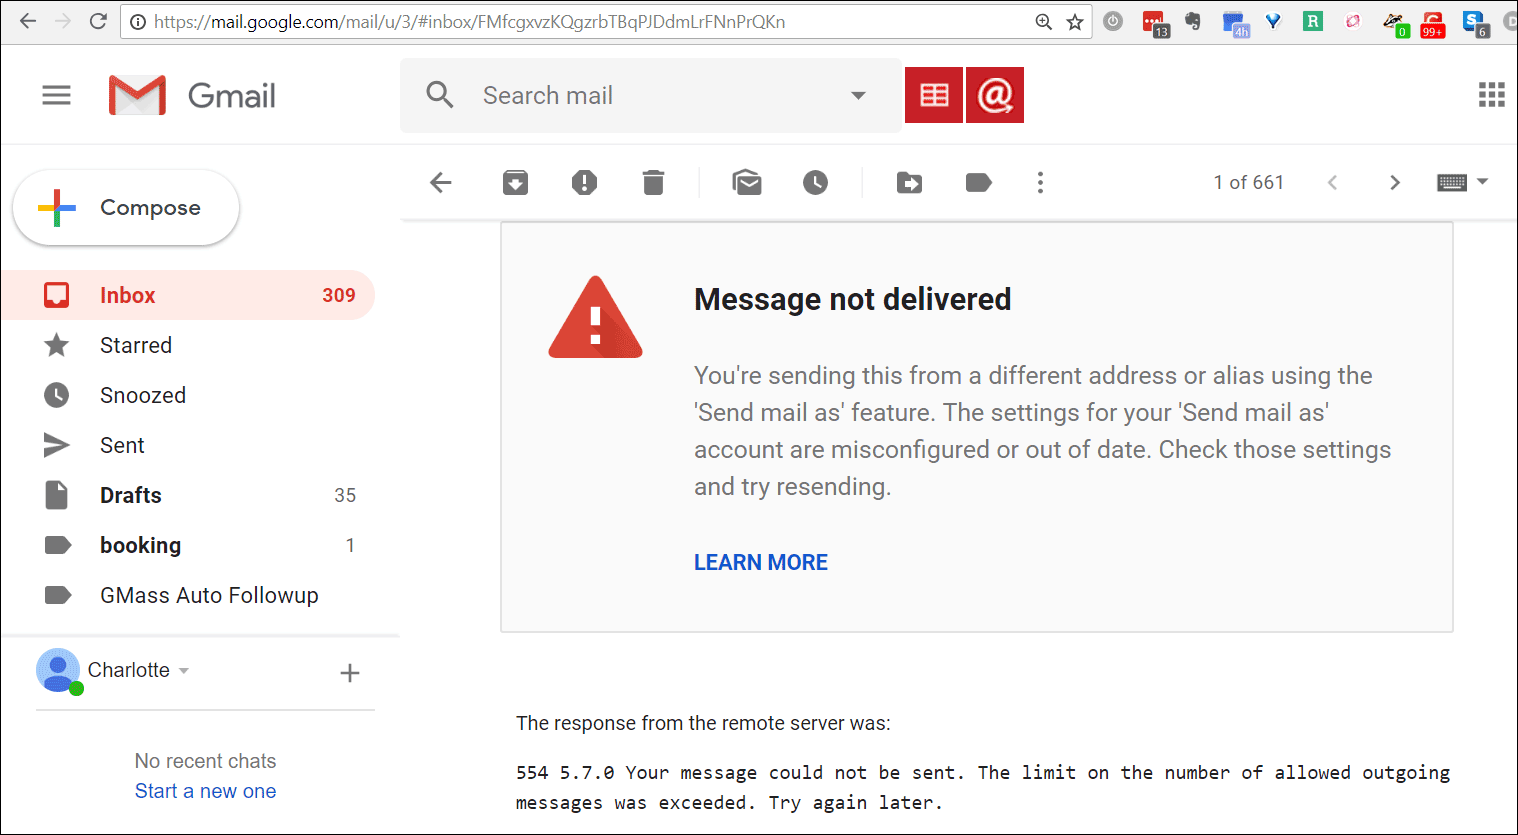 Resolving "Message not delivered" bounces from Gmail because your "Send